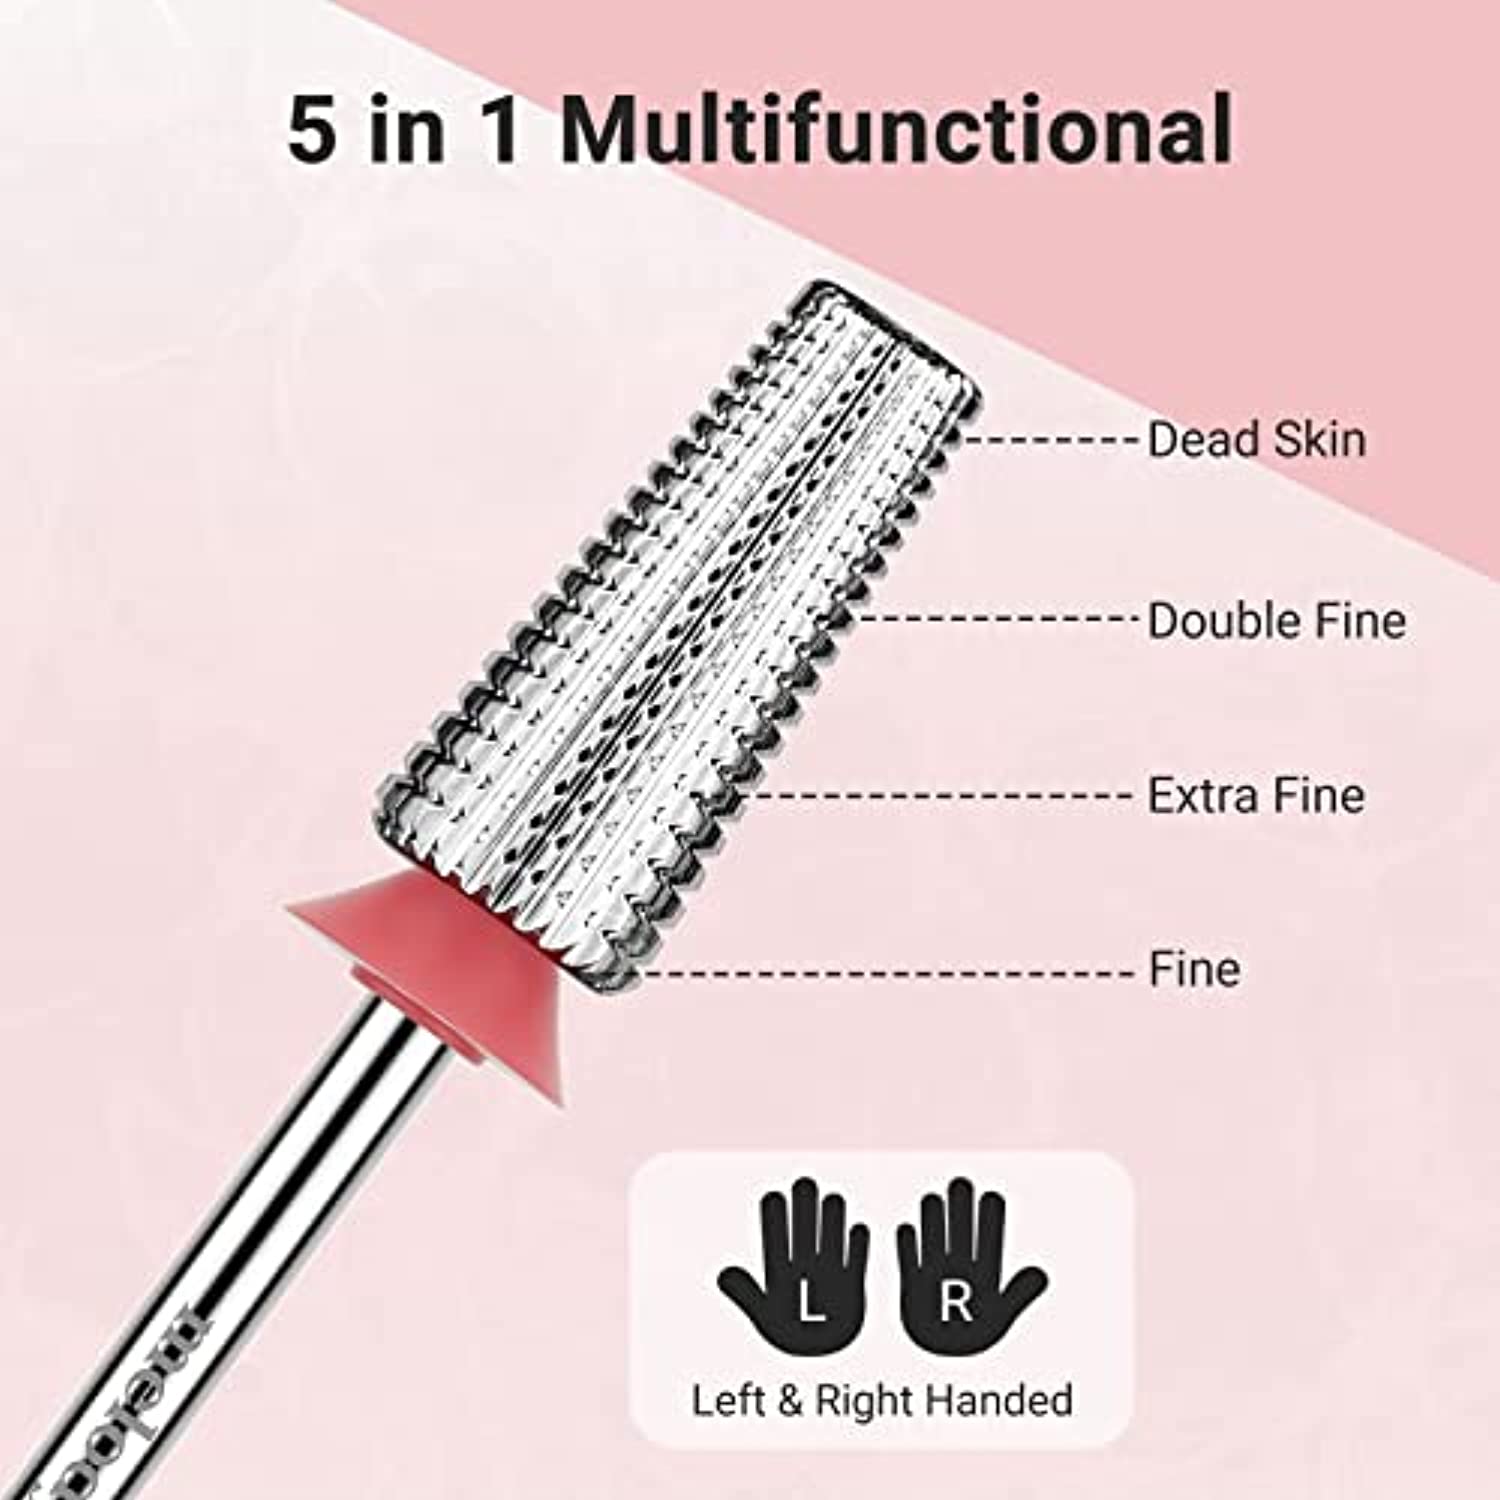 MelodySusie Professional Cordless Nail Drill, Portable Rechargeable Electric Efile Nail Machine File Kit with Bits and Sanding Bands for Acrylic Gel Nails, Manicure Pedicure Polishing